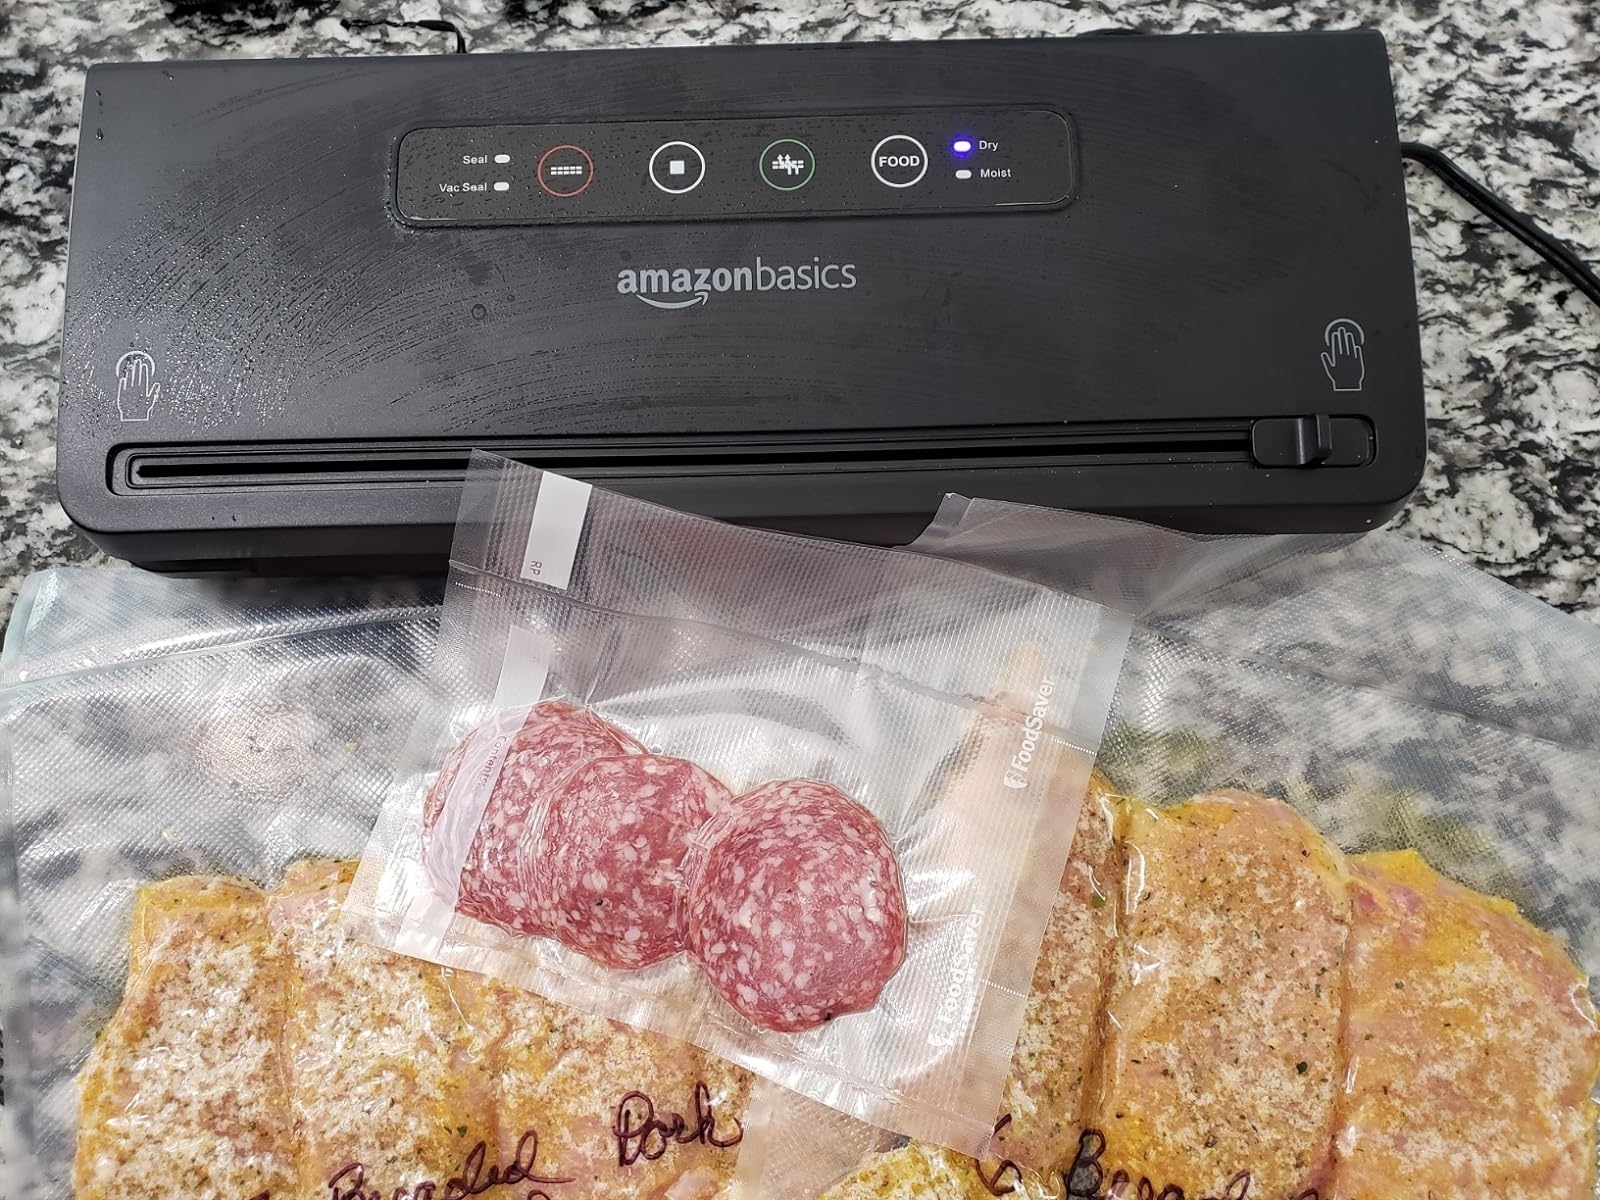 Reviewer image of the appliance and sealed meat packages